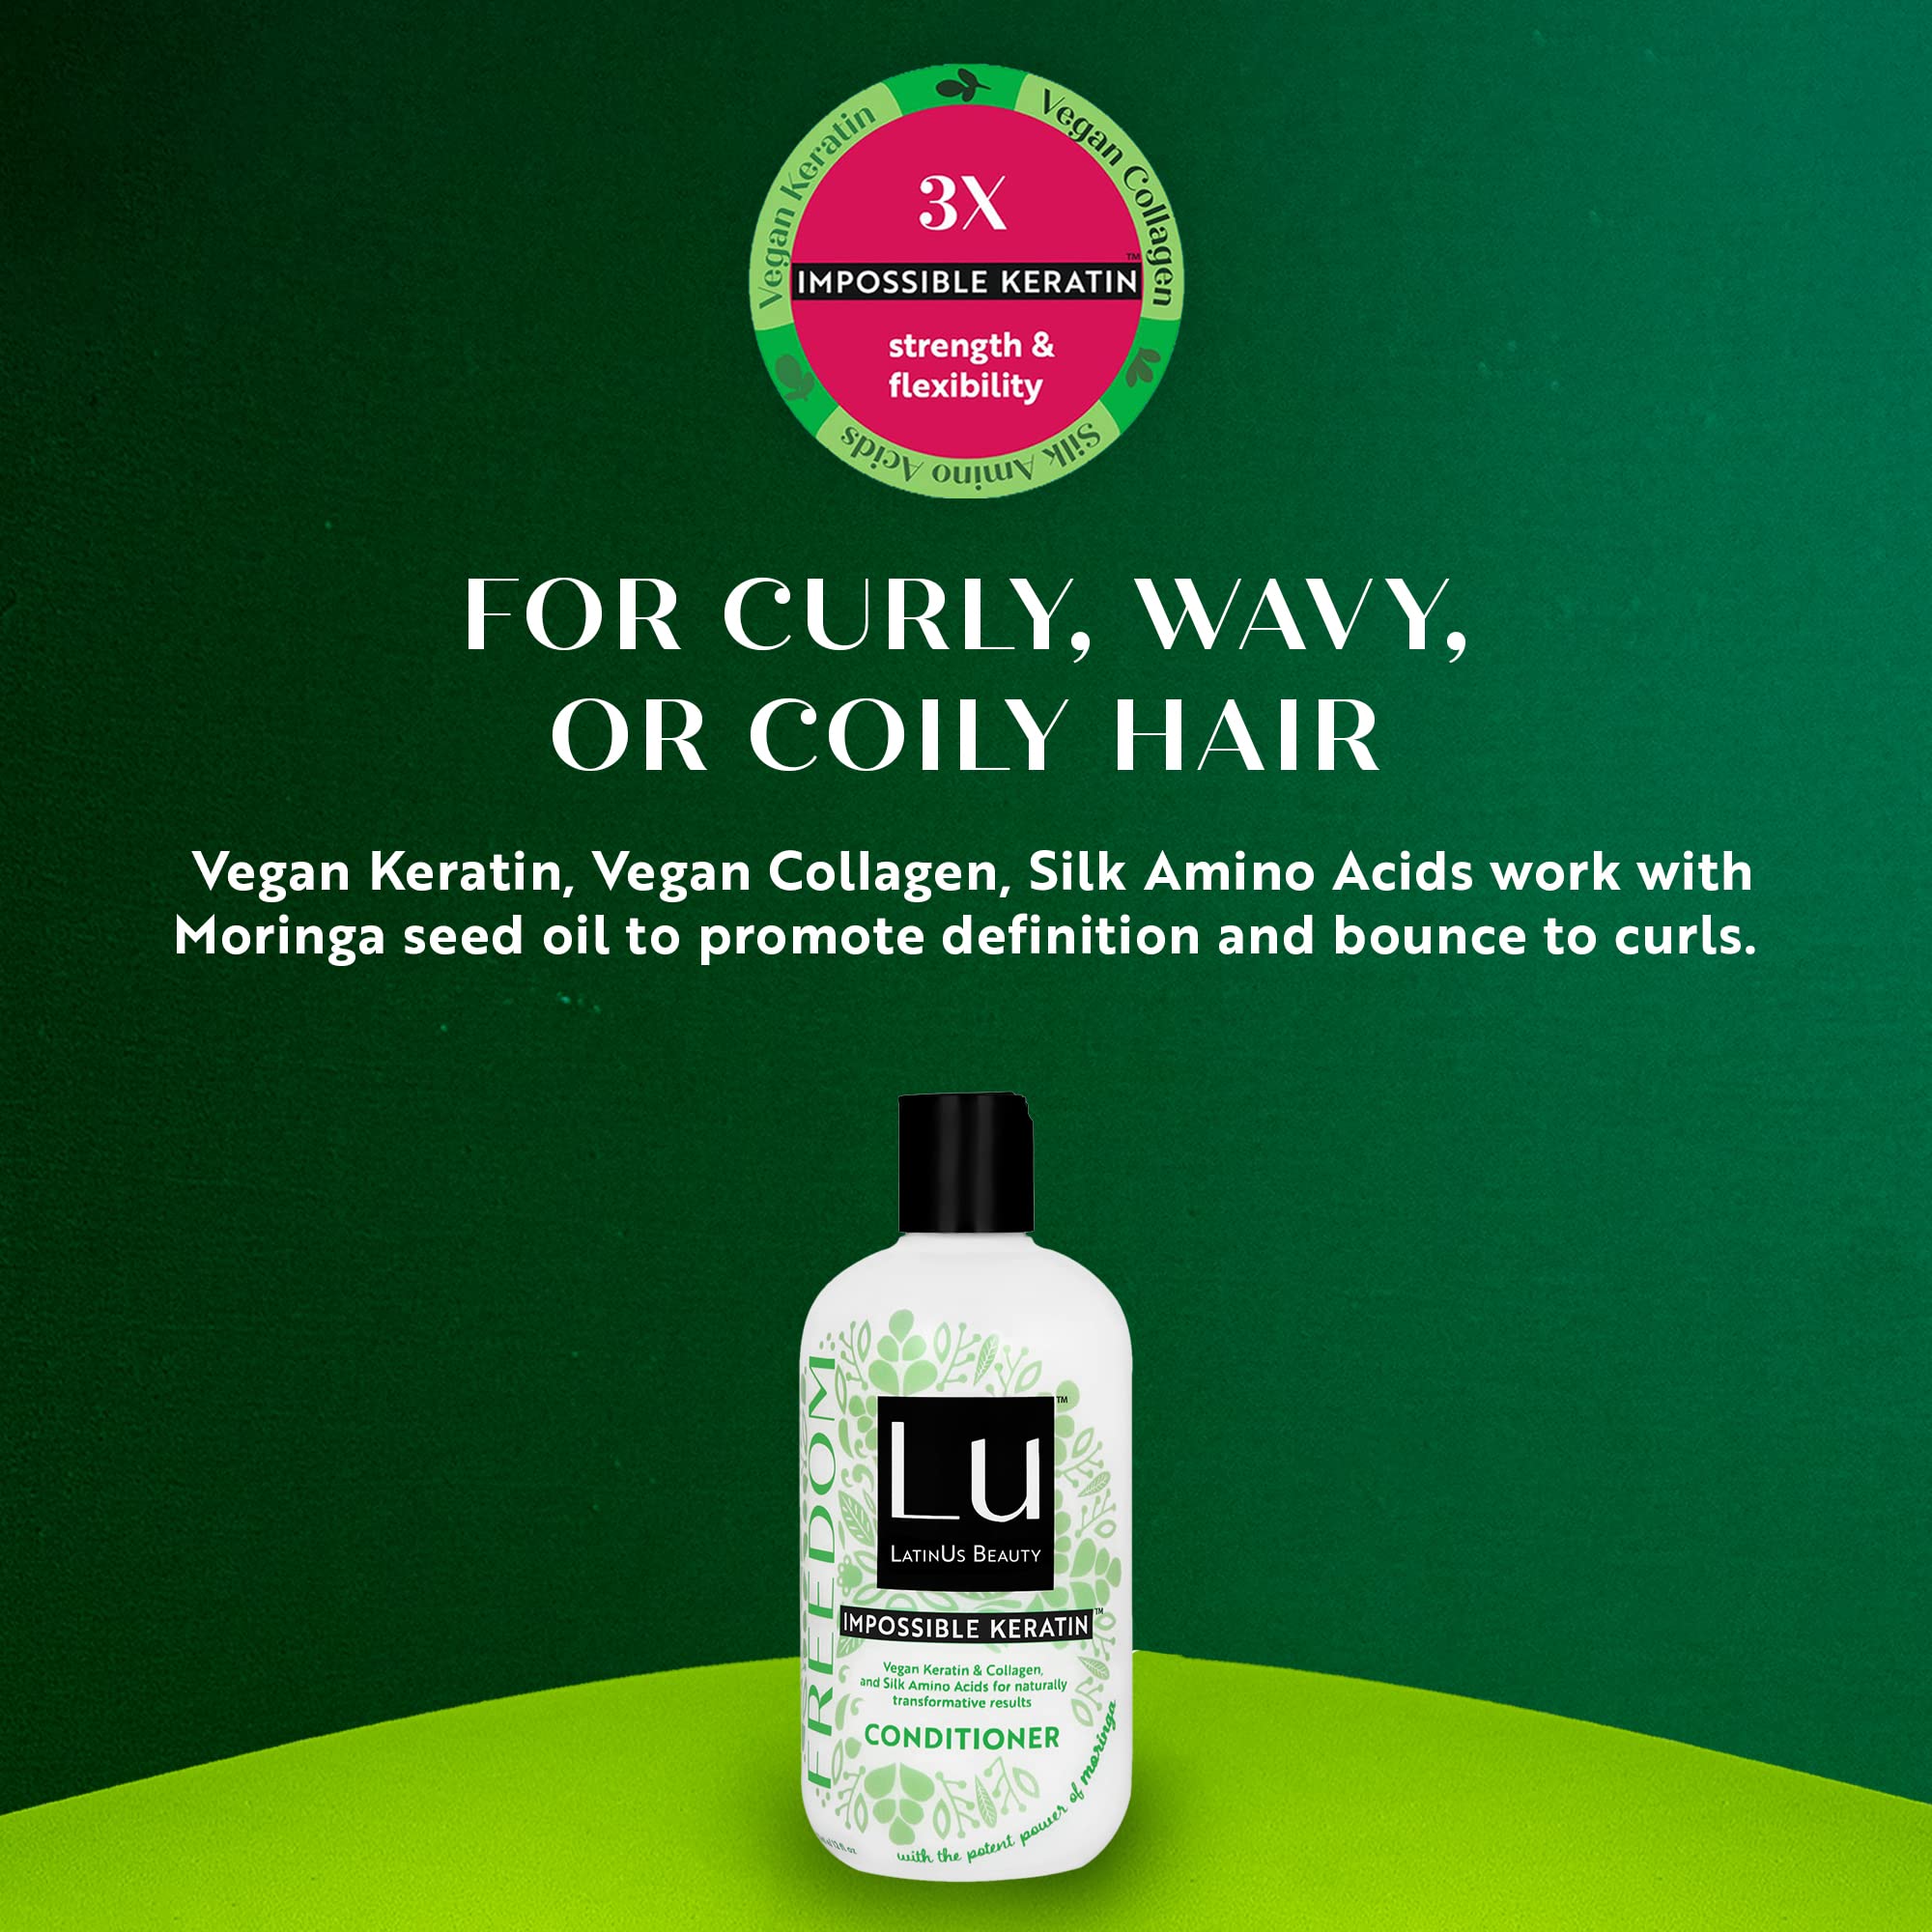 Lu LatinUs Beauty FREEDOM Full Volume Clean Conditioner with Antioxidant Moringa Seed Oil for Bouncy, Defined, Frizz Free, Shiny Curls (12oz)